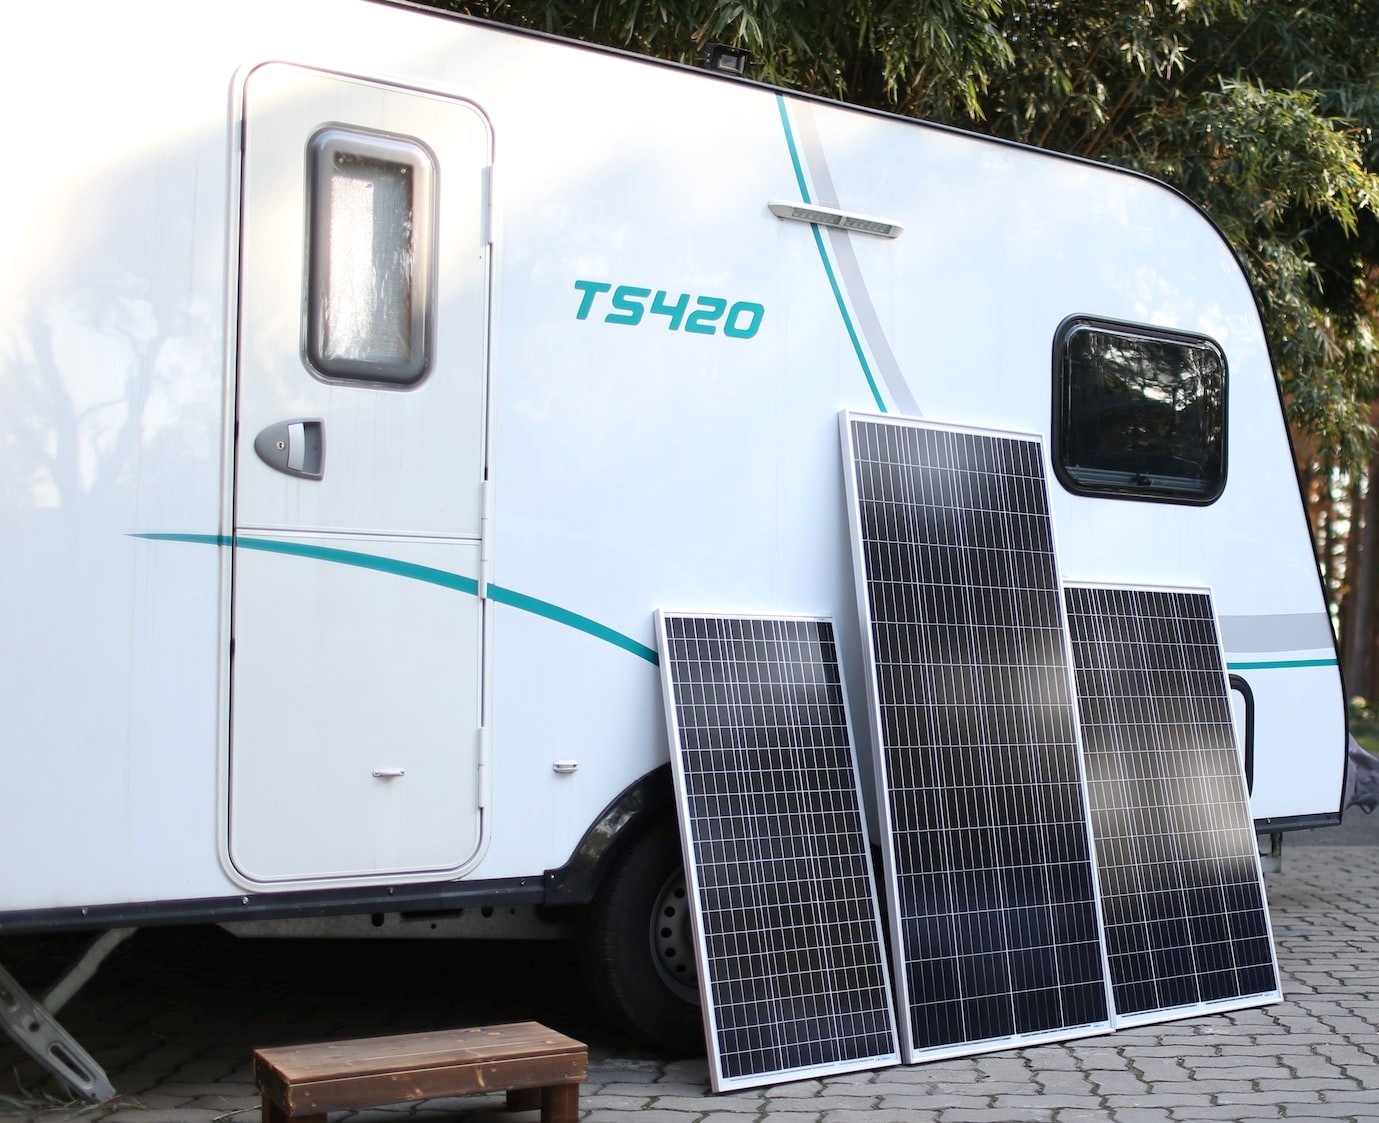 Solar powered camper. Install solar panels on the roof of a camper.